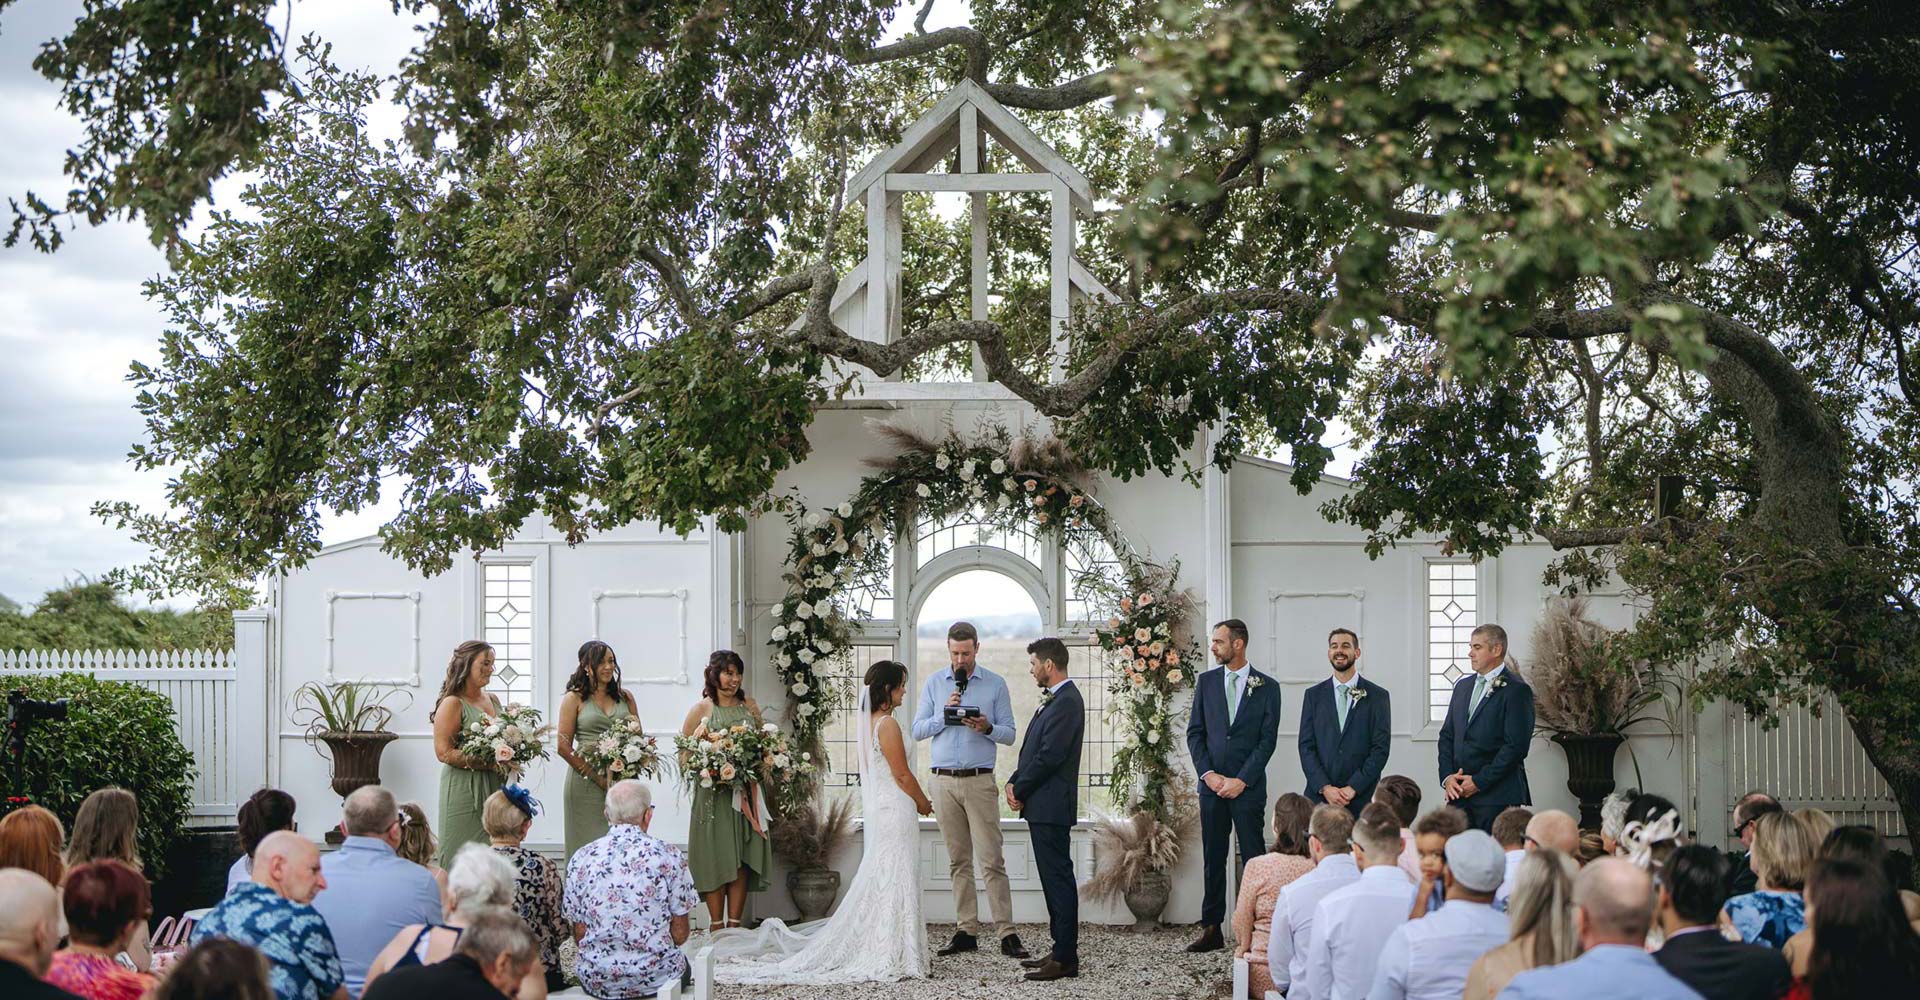 Picture-perfect wedding venues in the Waikato you'll want to check out